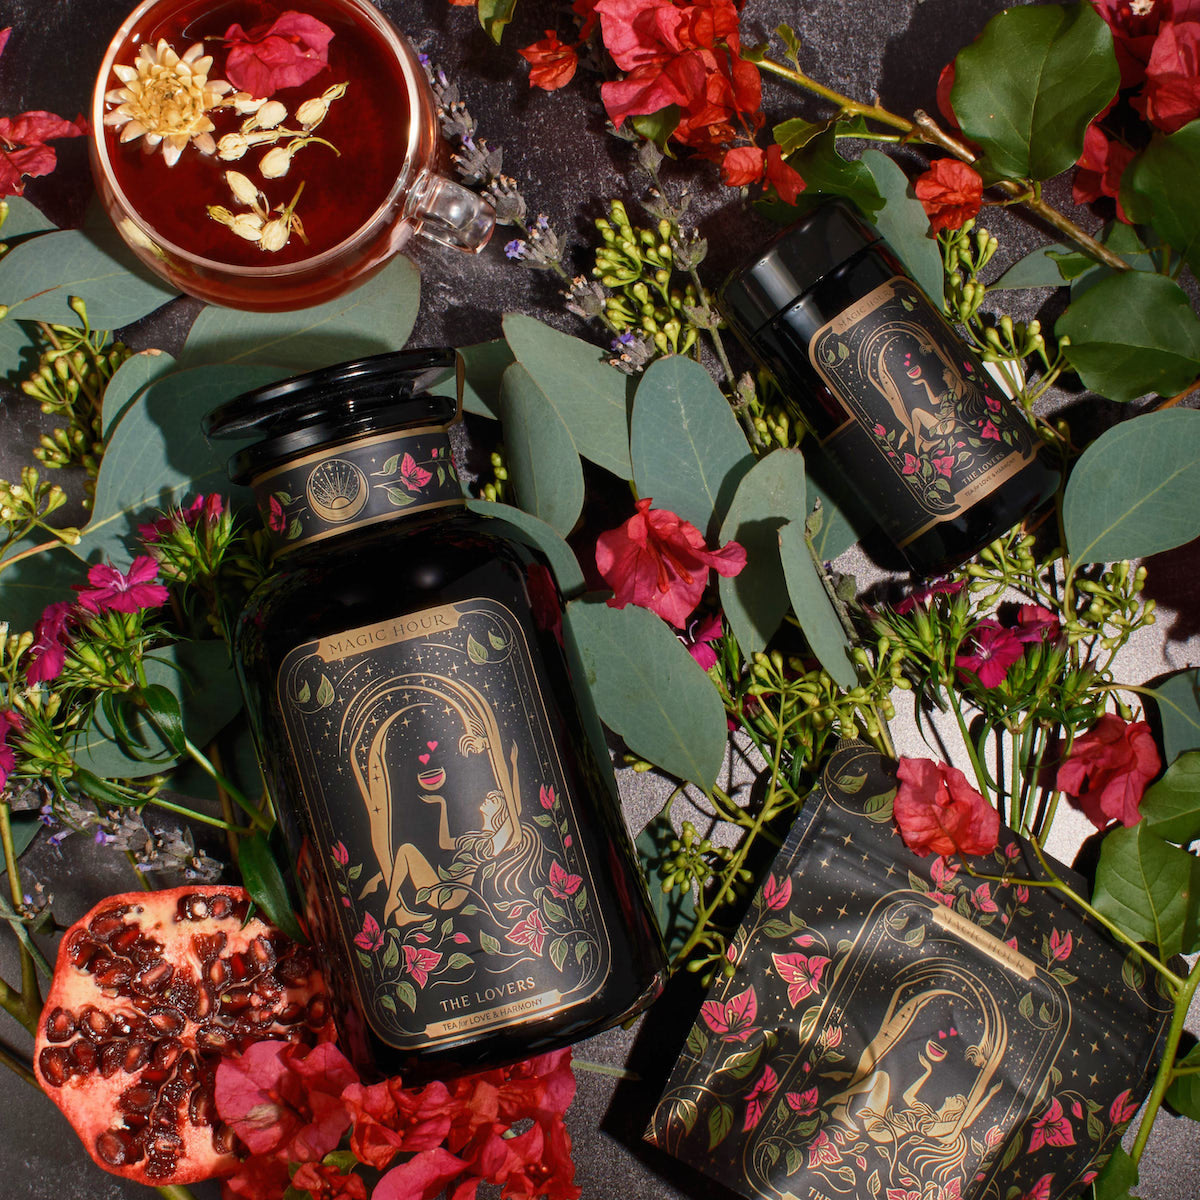 An ornate black jar labeled &quot;The Lovers&quot; from Magic Hour, surrounded by pink and red flowers, eucalyptus leaves, a pomegranate half, a tea cup with floating flowers, a smaller jar, and a box. The setting is a dark surface with a romantic and botanical theme featuring Organic Hibiscus.